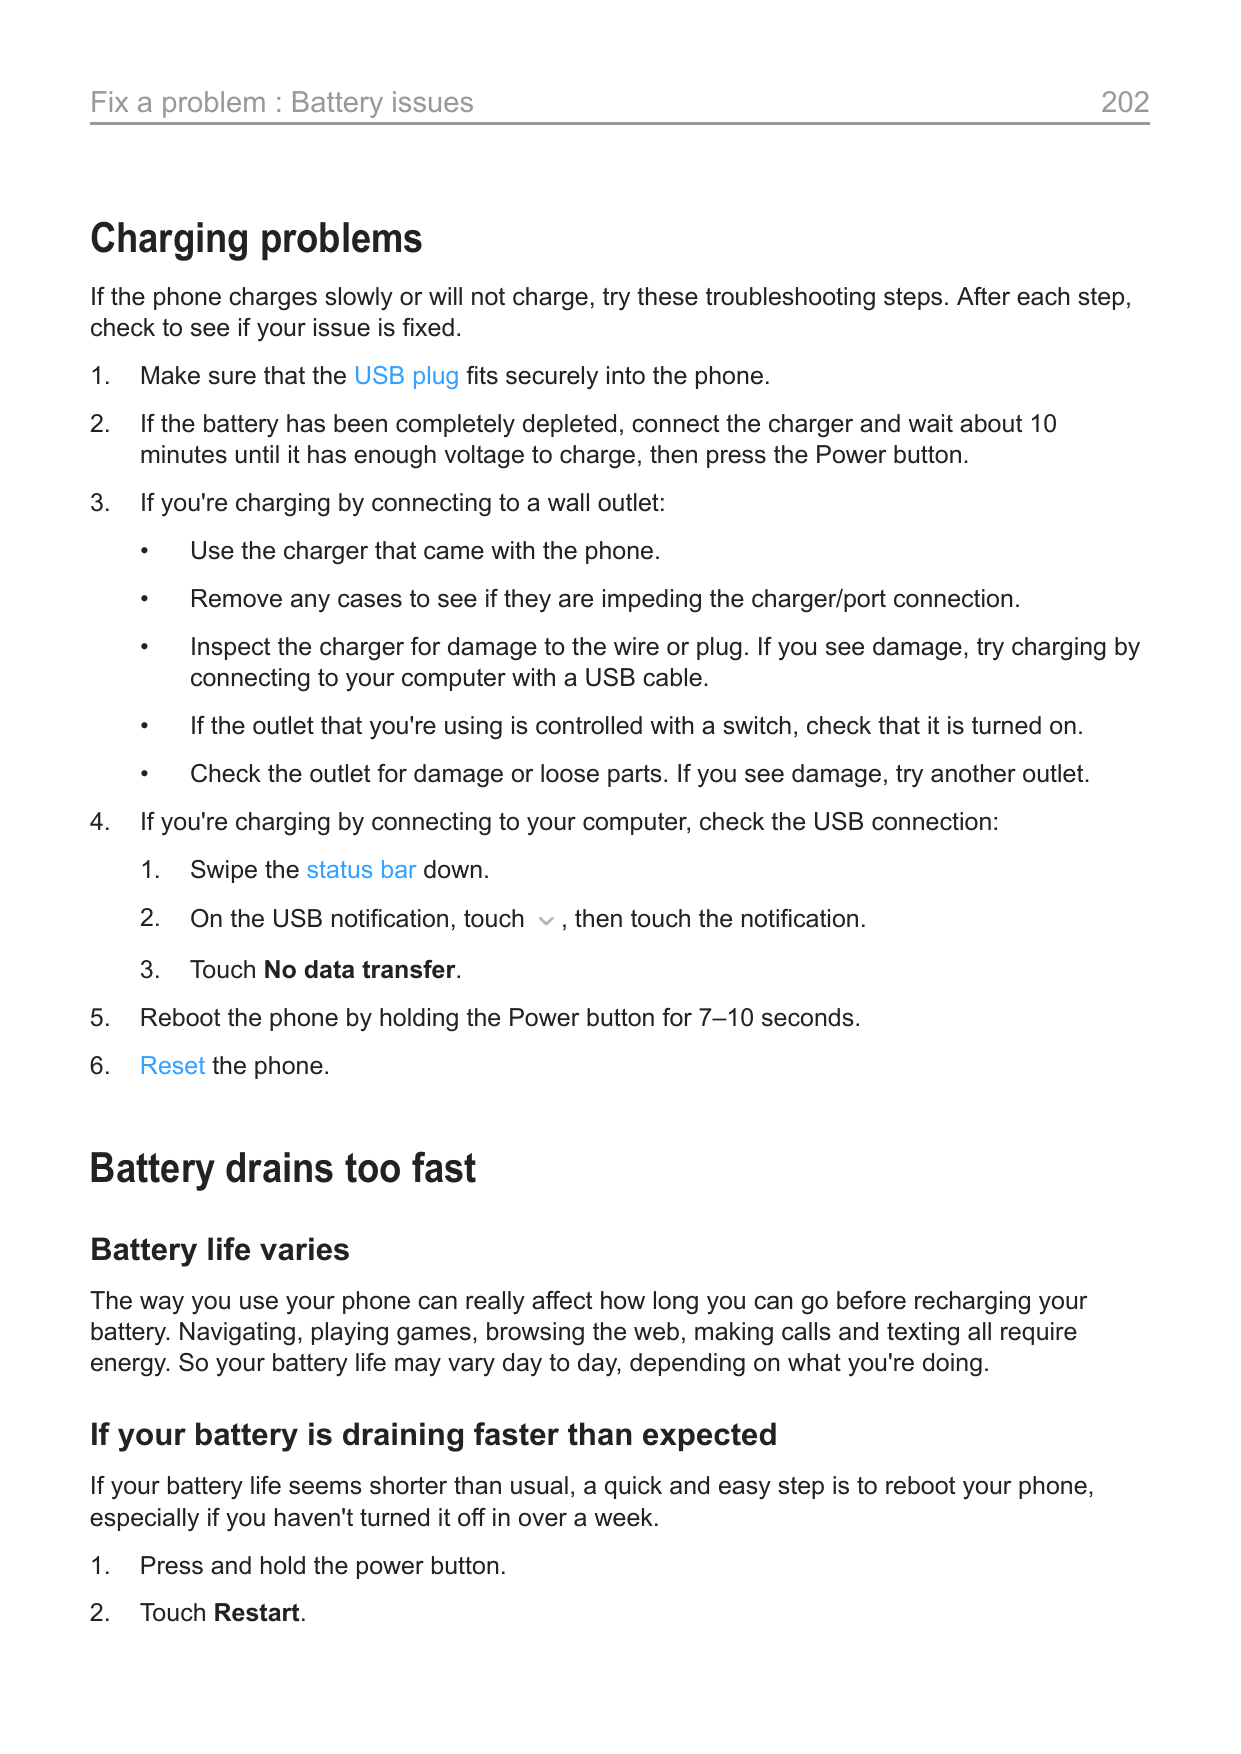 Fix a problem : Battery issues202Charging problemsIf the phone charges slowly or will not charge, try these troubleshooting step